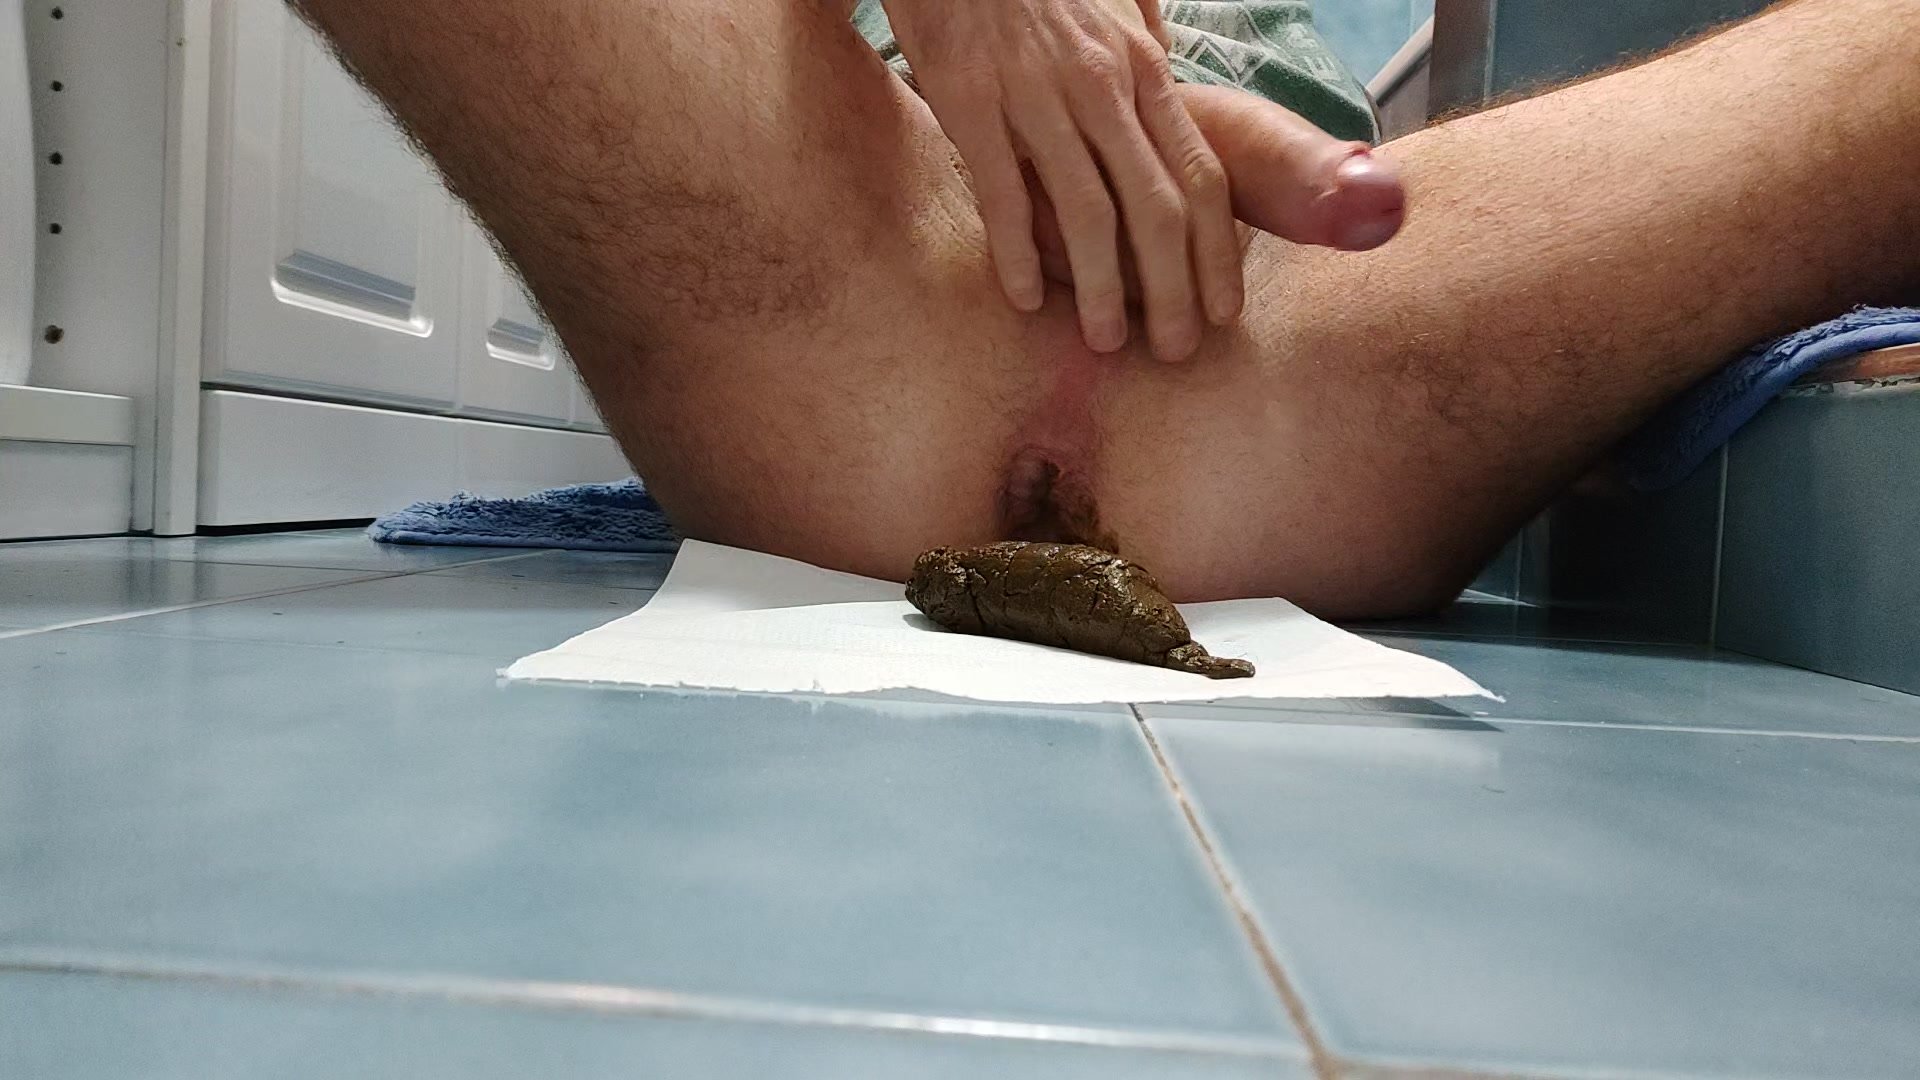 Second shit of today jerk and cum